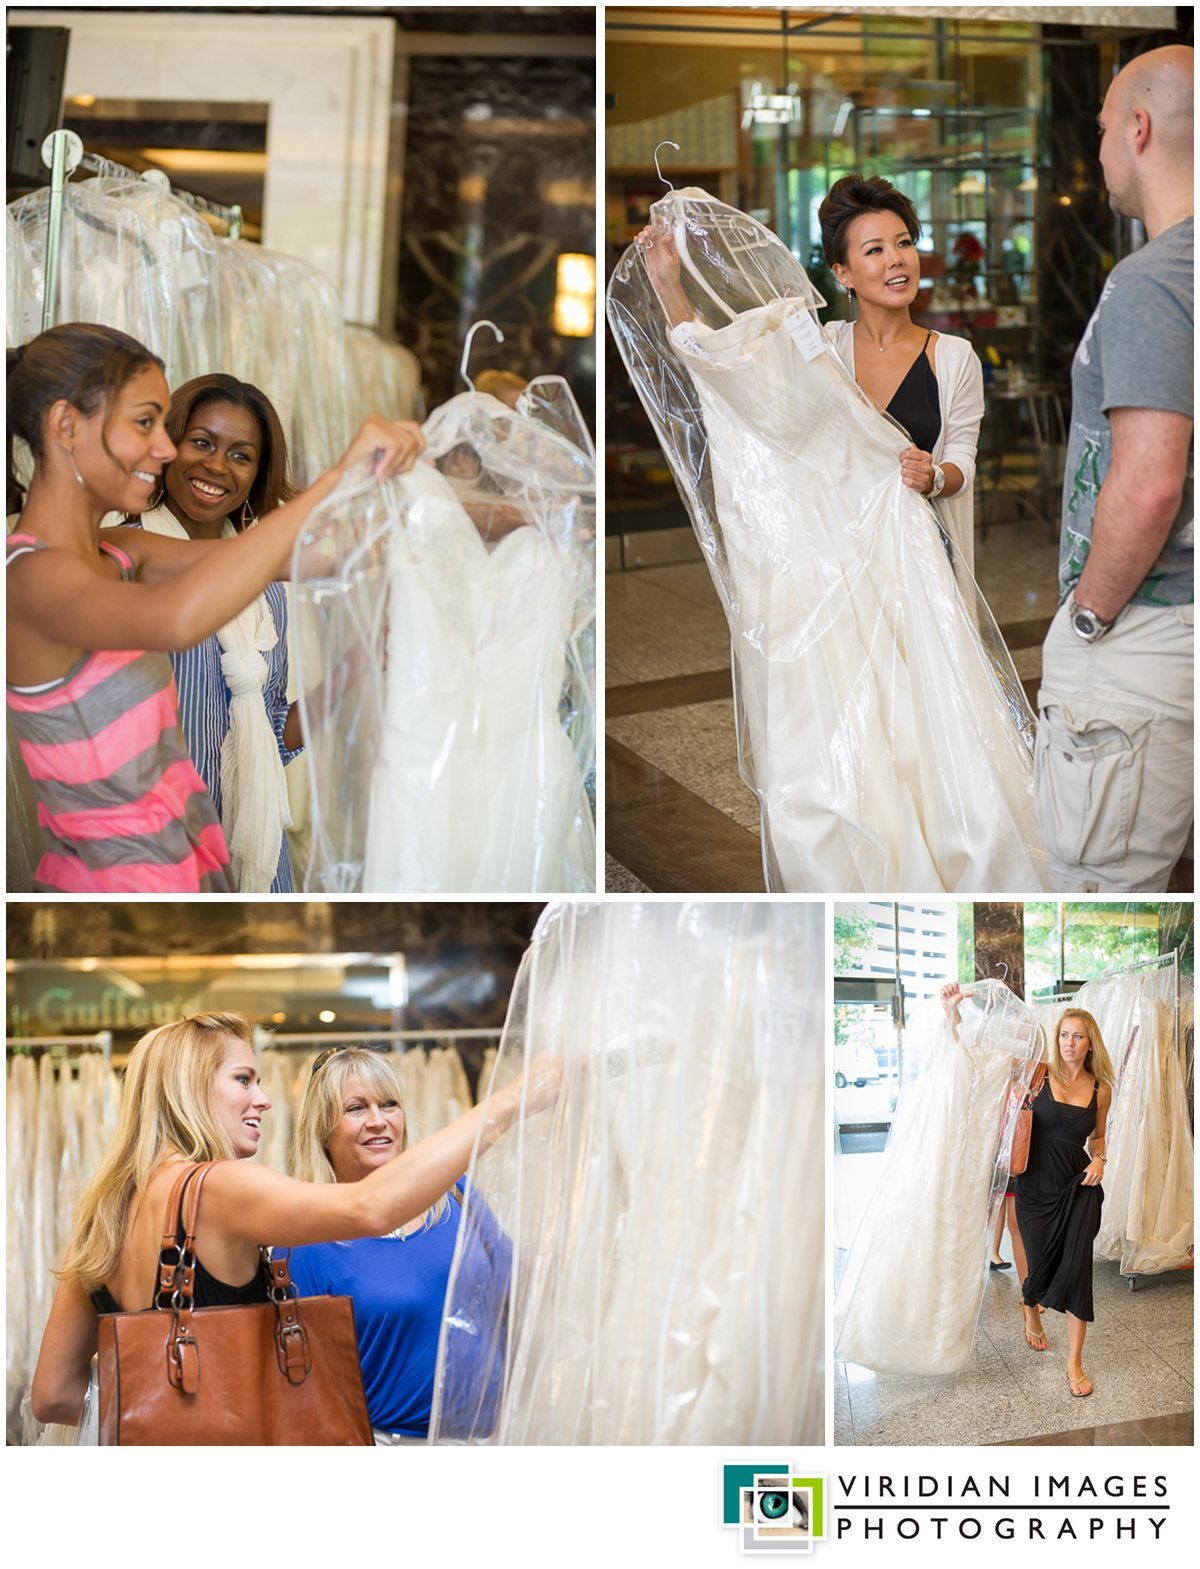 Viridian_Images_Photography_Guffys_Buckhead_Bridals_Anne_Barge_7_photo